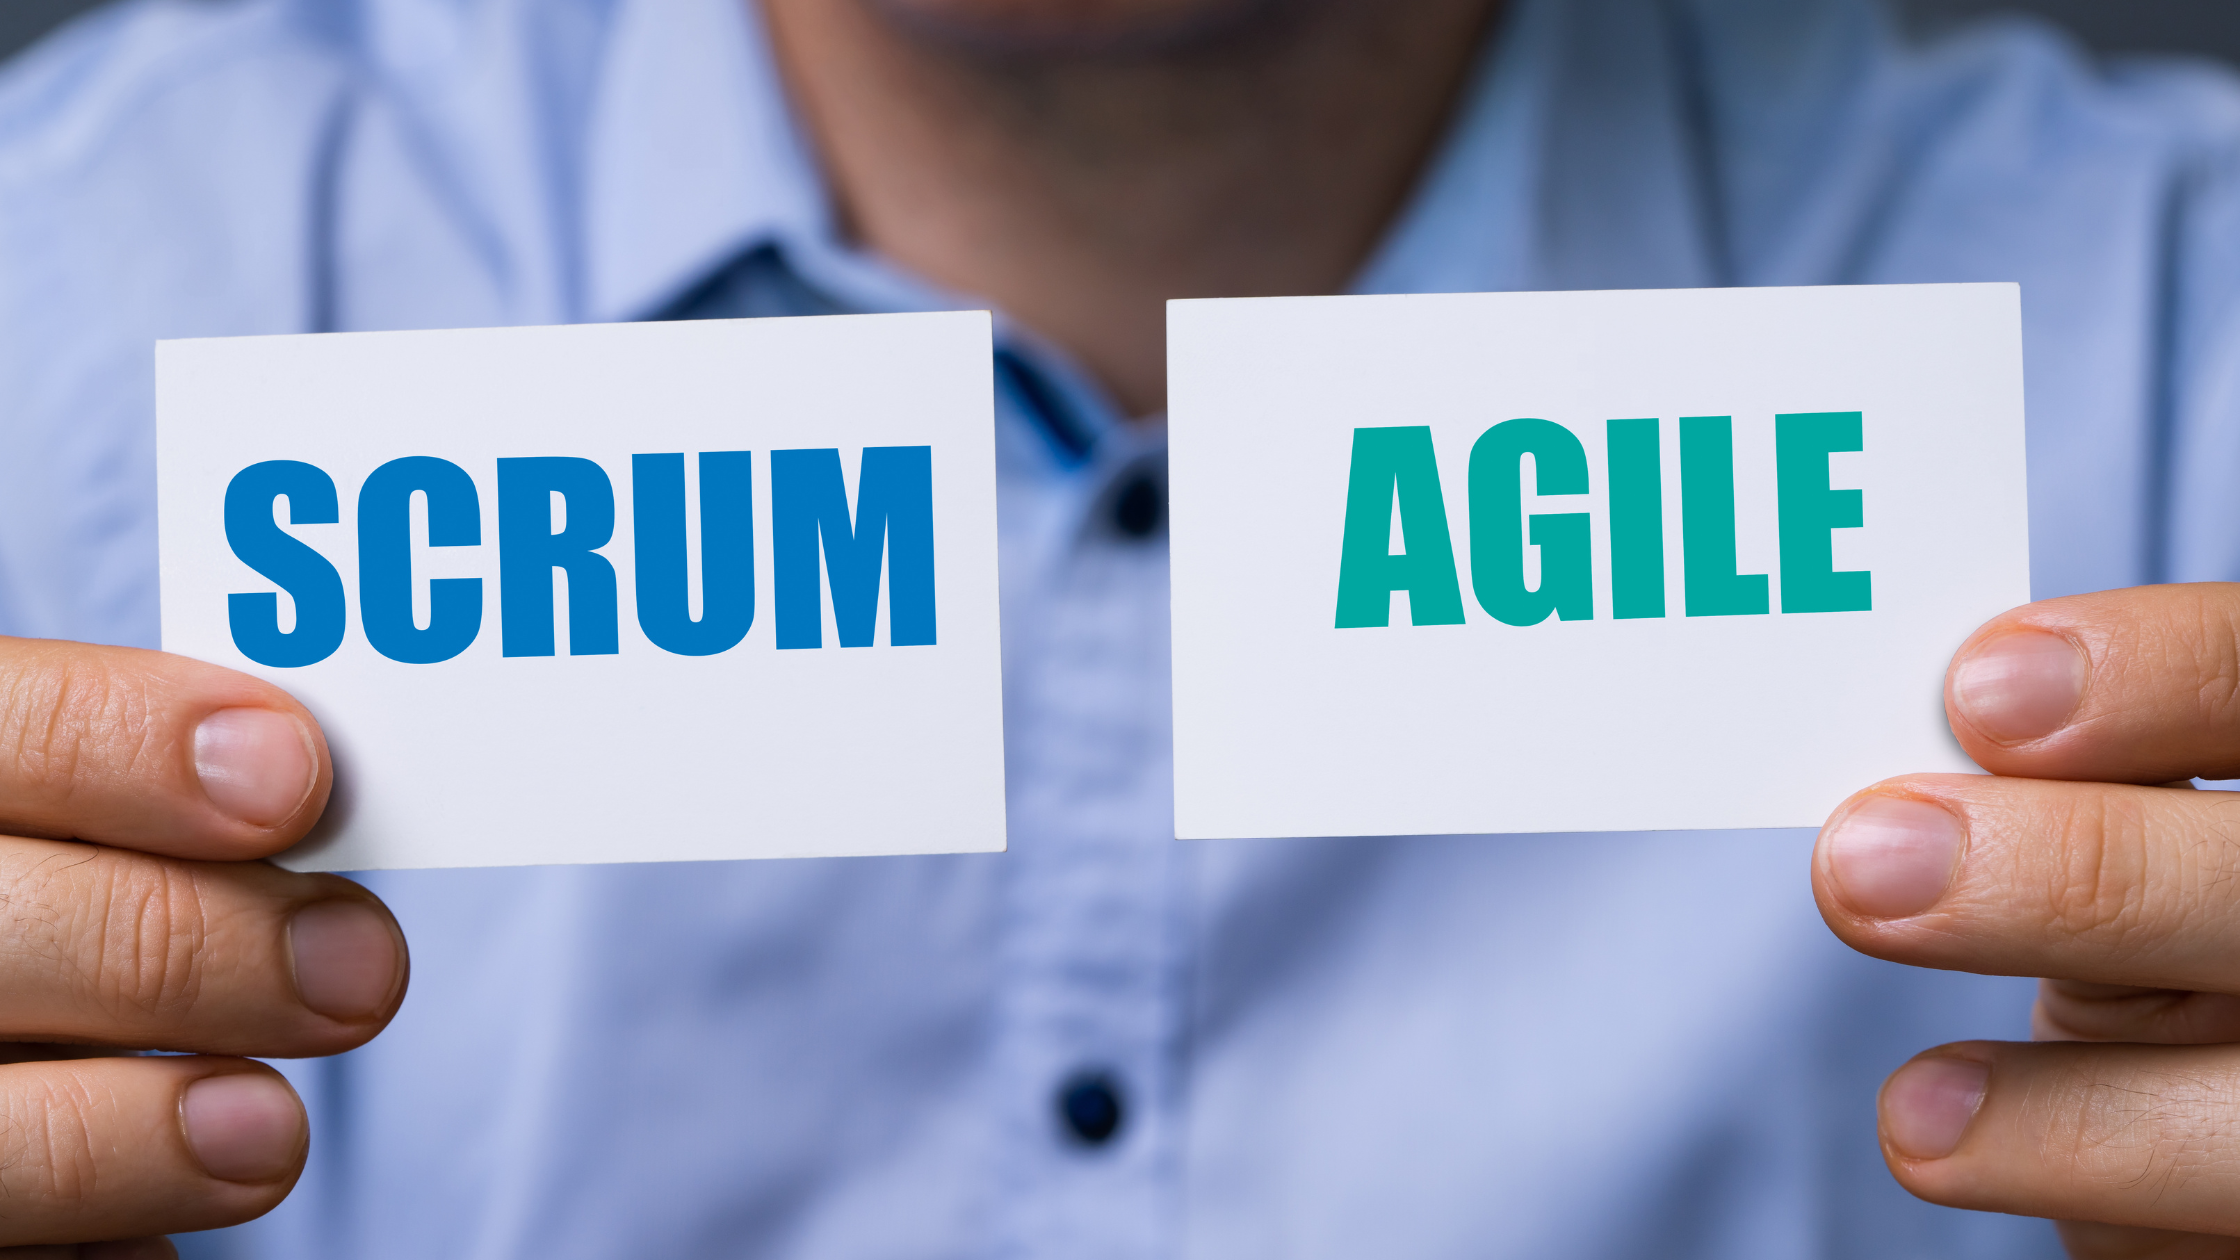 What's The Difference Between Scrum and Agile?